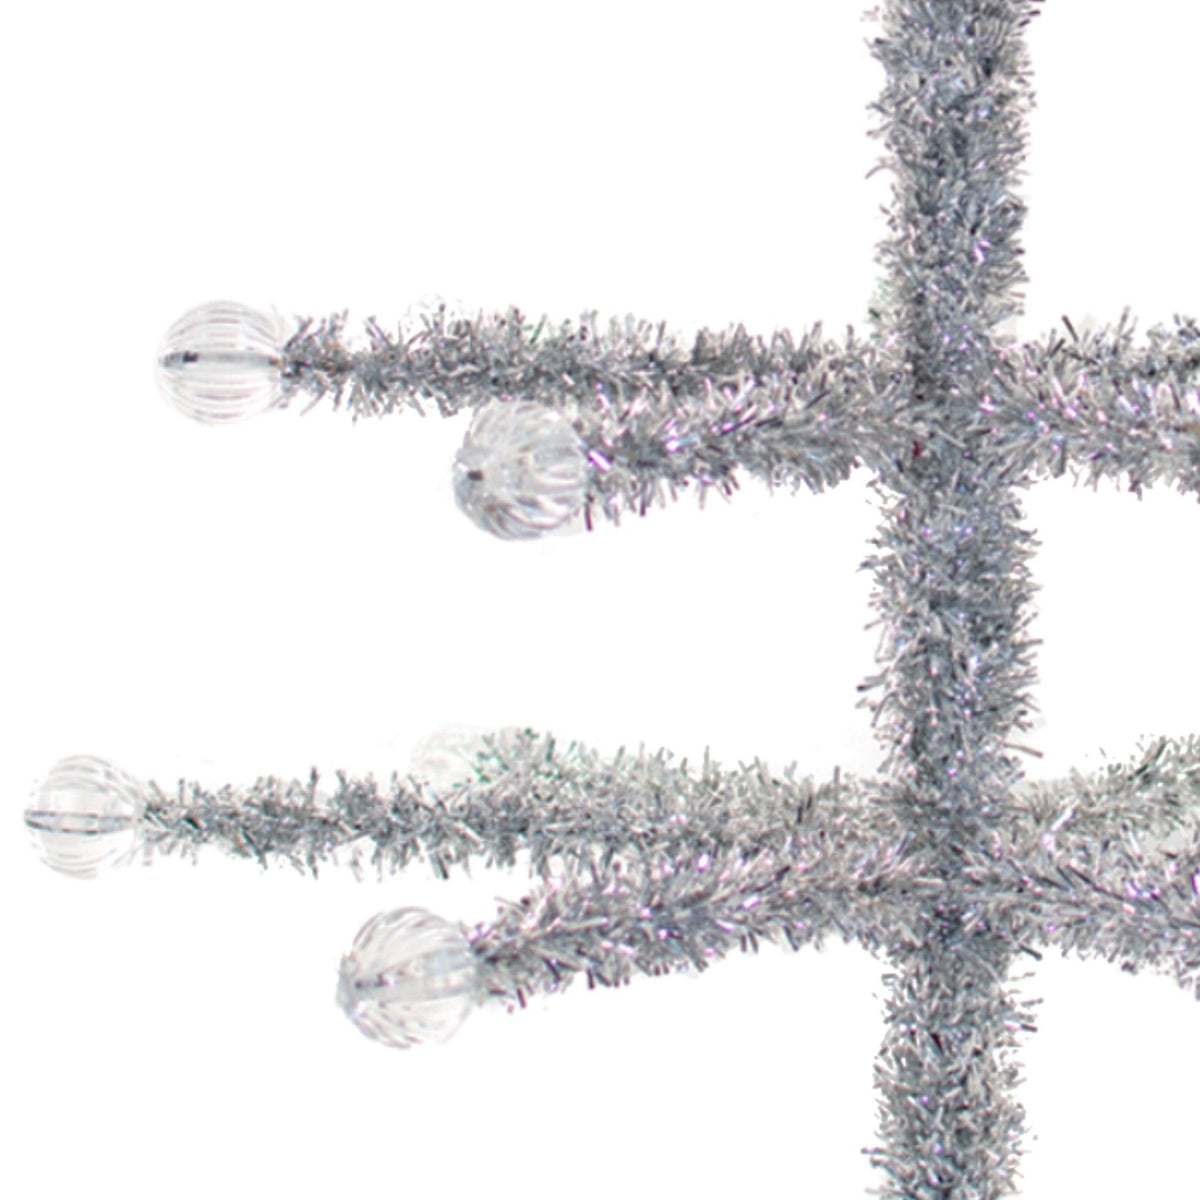 Lee Display's Silver Merchandising and Display tree comes with clear acrylic beads on the end of each branch